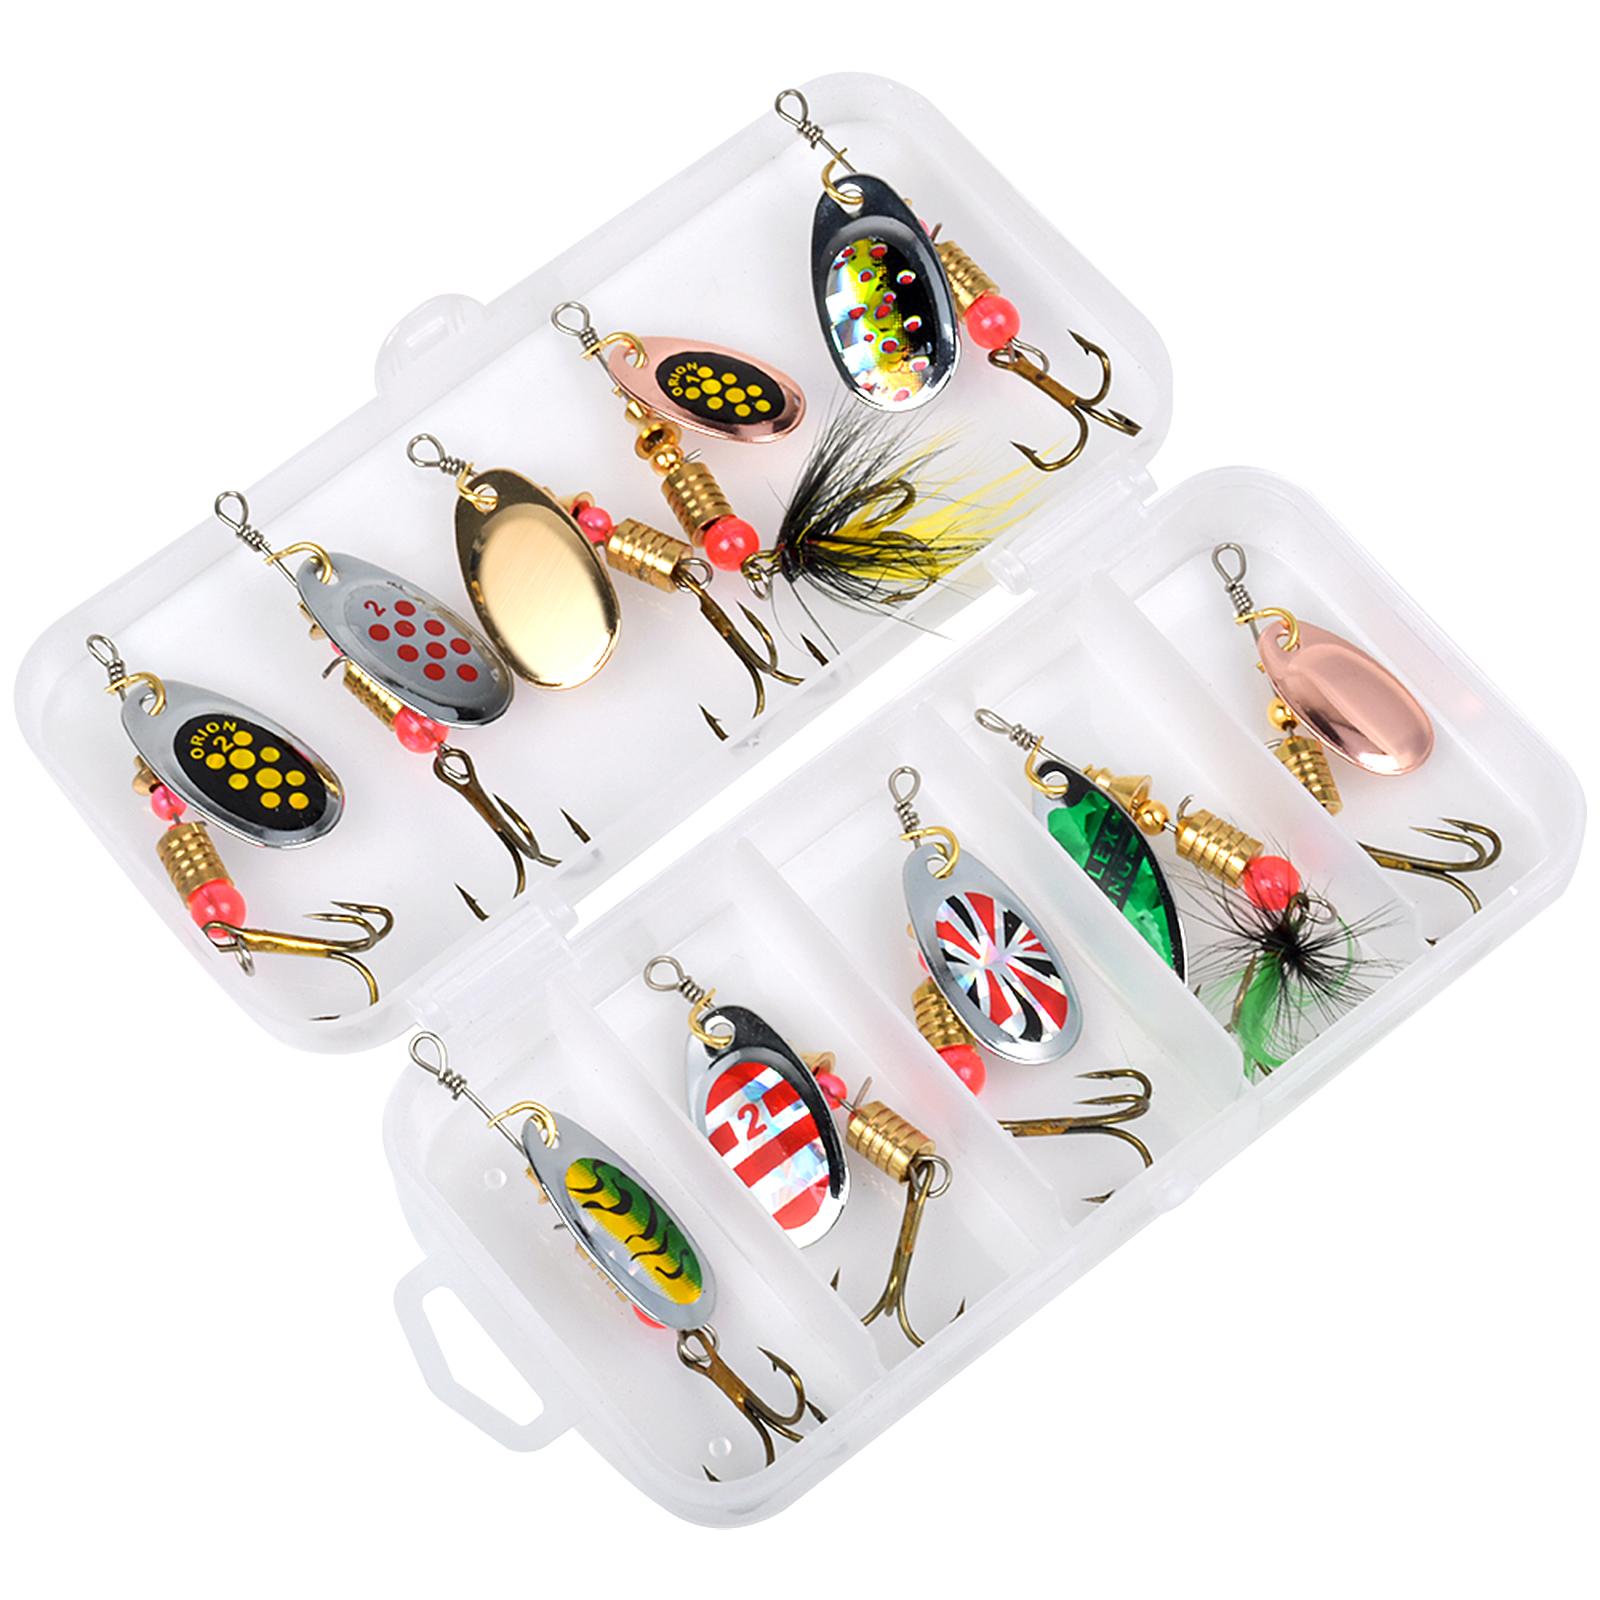 Fishing Spinners Lures Kit Perfect For Trout Pike Perch Bass